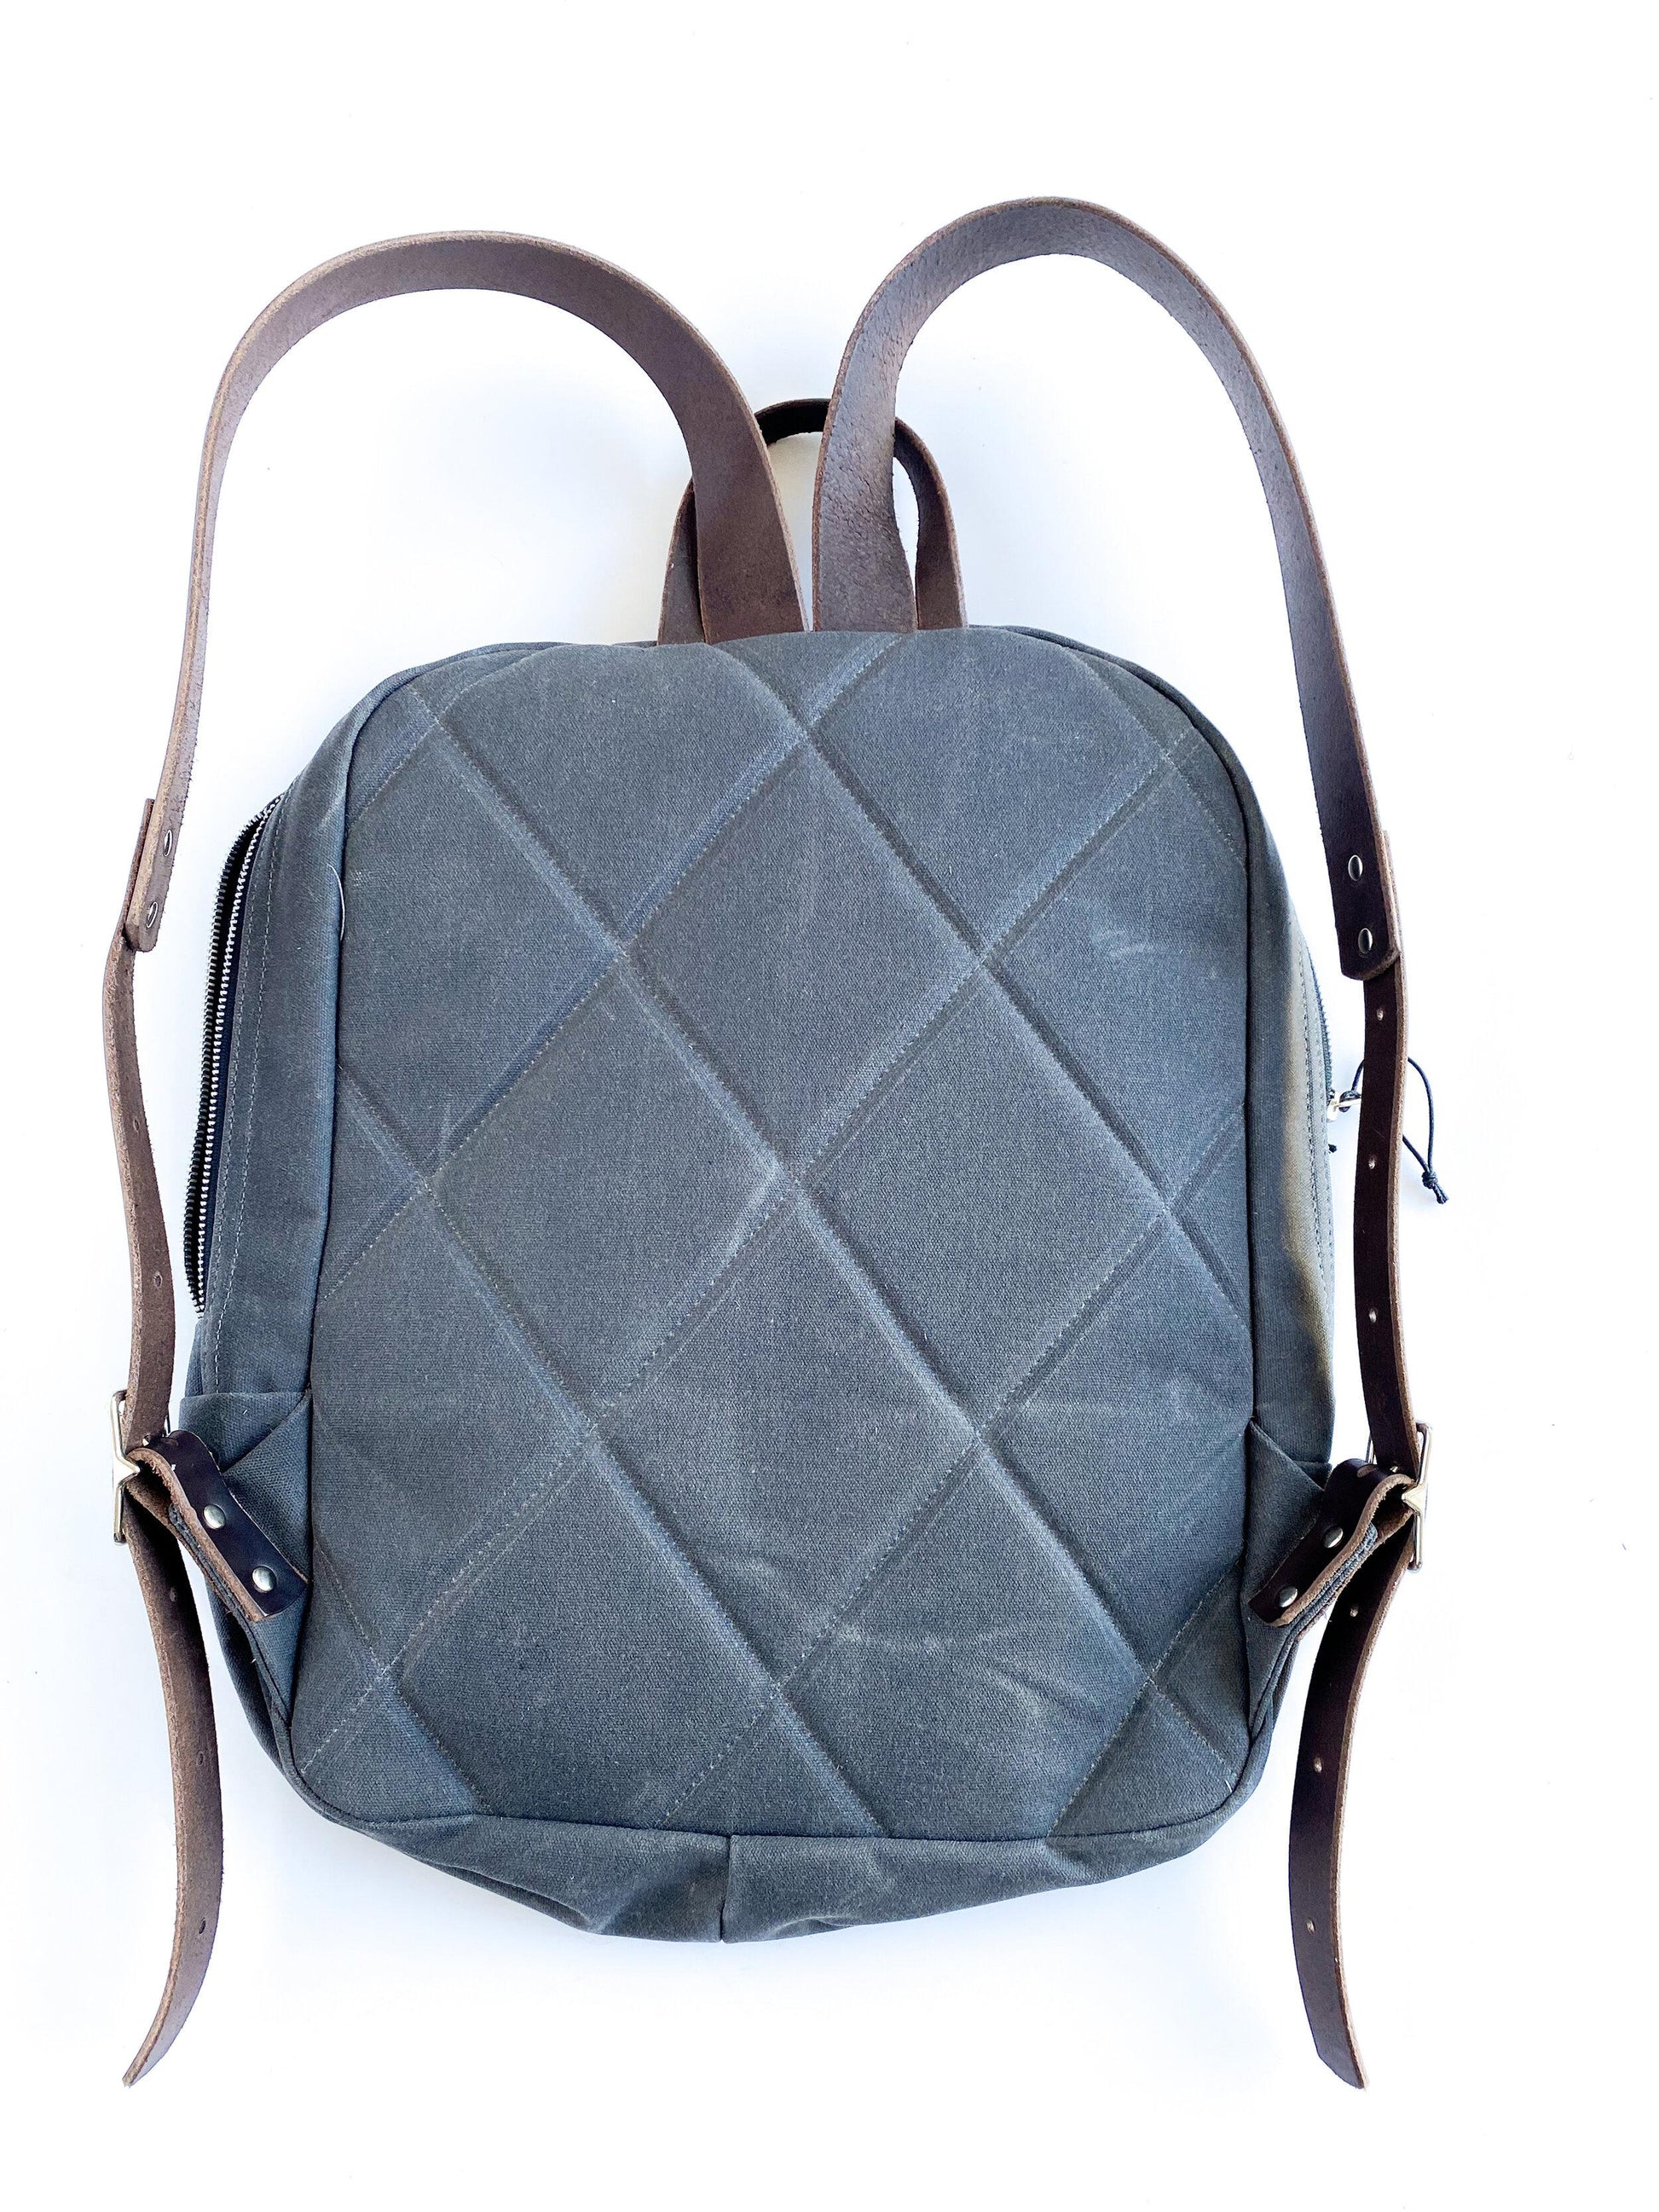 Waxed canvas backpack, quilted back detail. 